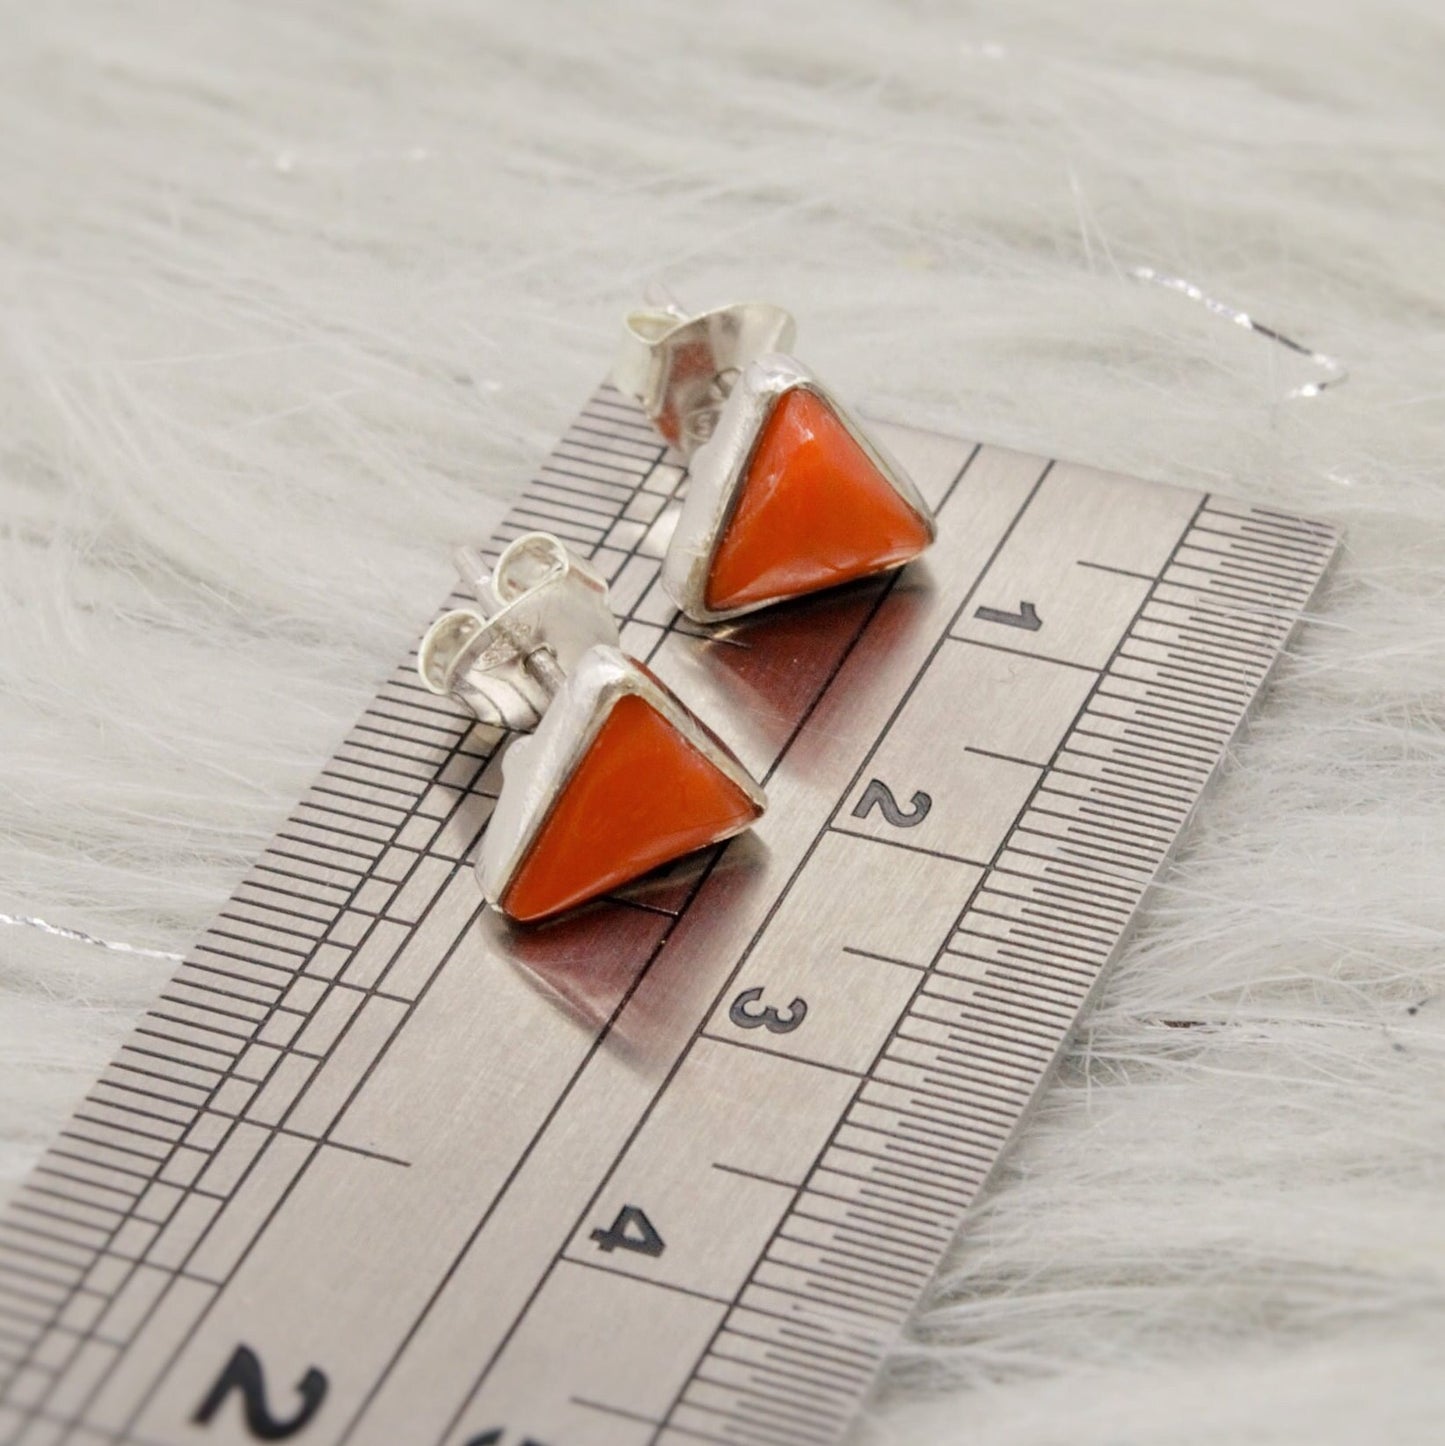 Red Coral Sterling Silver Stud Earrings, Dainty Triangle Earrings, Everyday Gemstone Earrings, Coral Jewelry, Birthday Gifts For Her